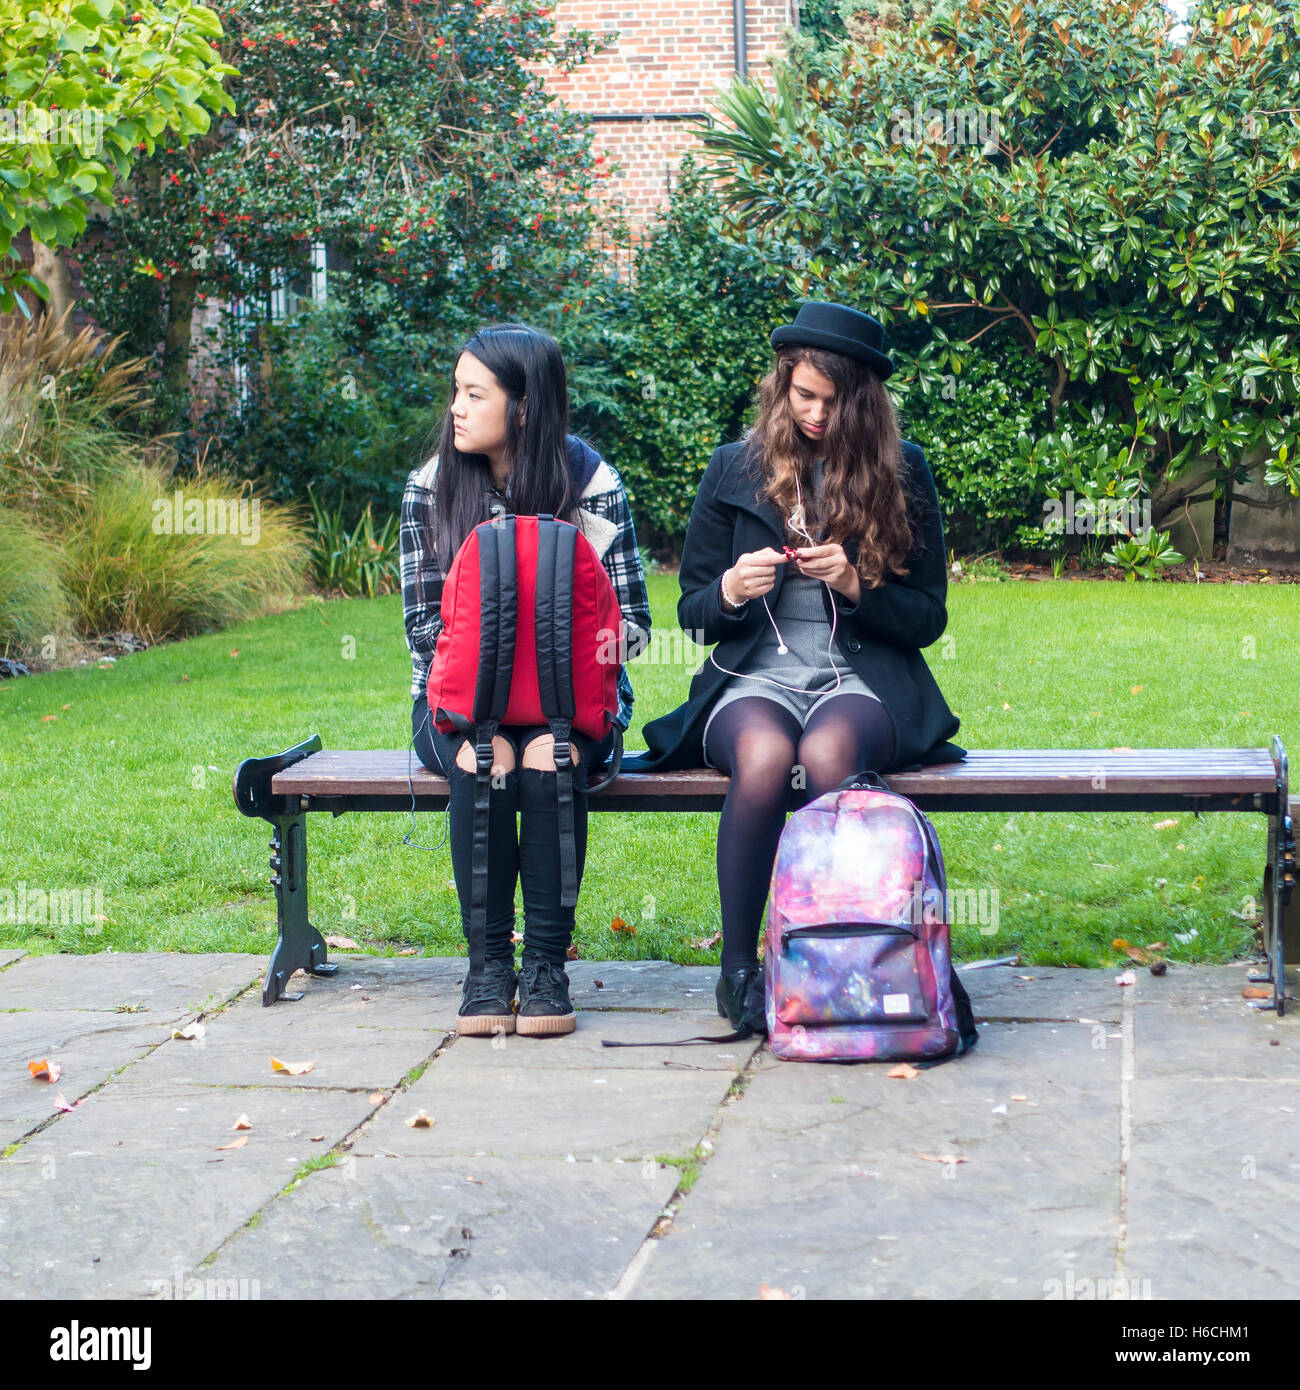 Two Female Students Sitting on a Bench Canterbury City Centre Kent England Stock Photo